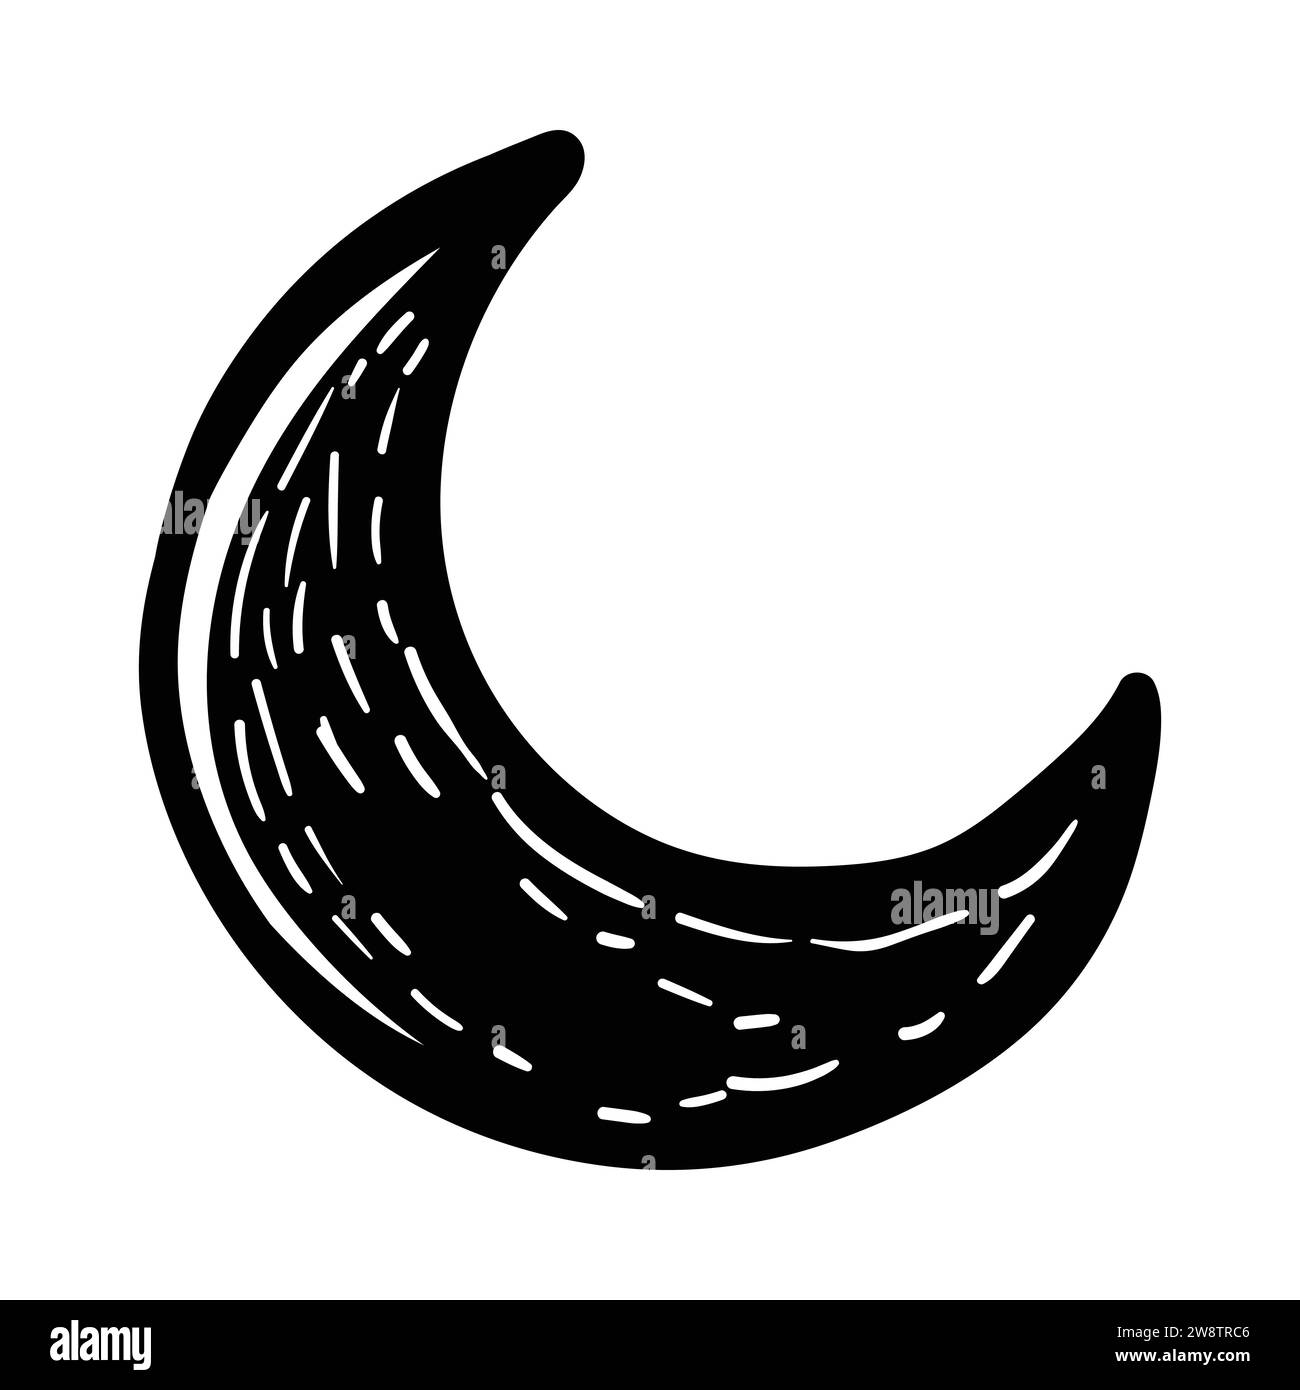 Moon icon Black and White Stock Photos & Images - Alamy